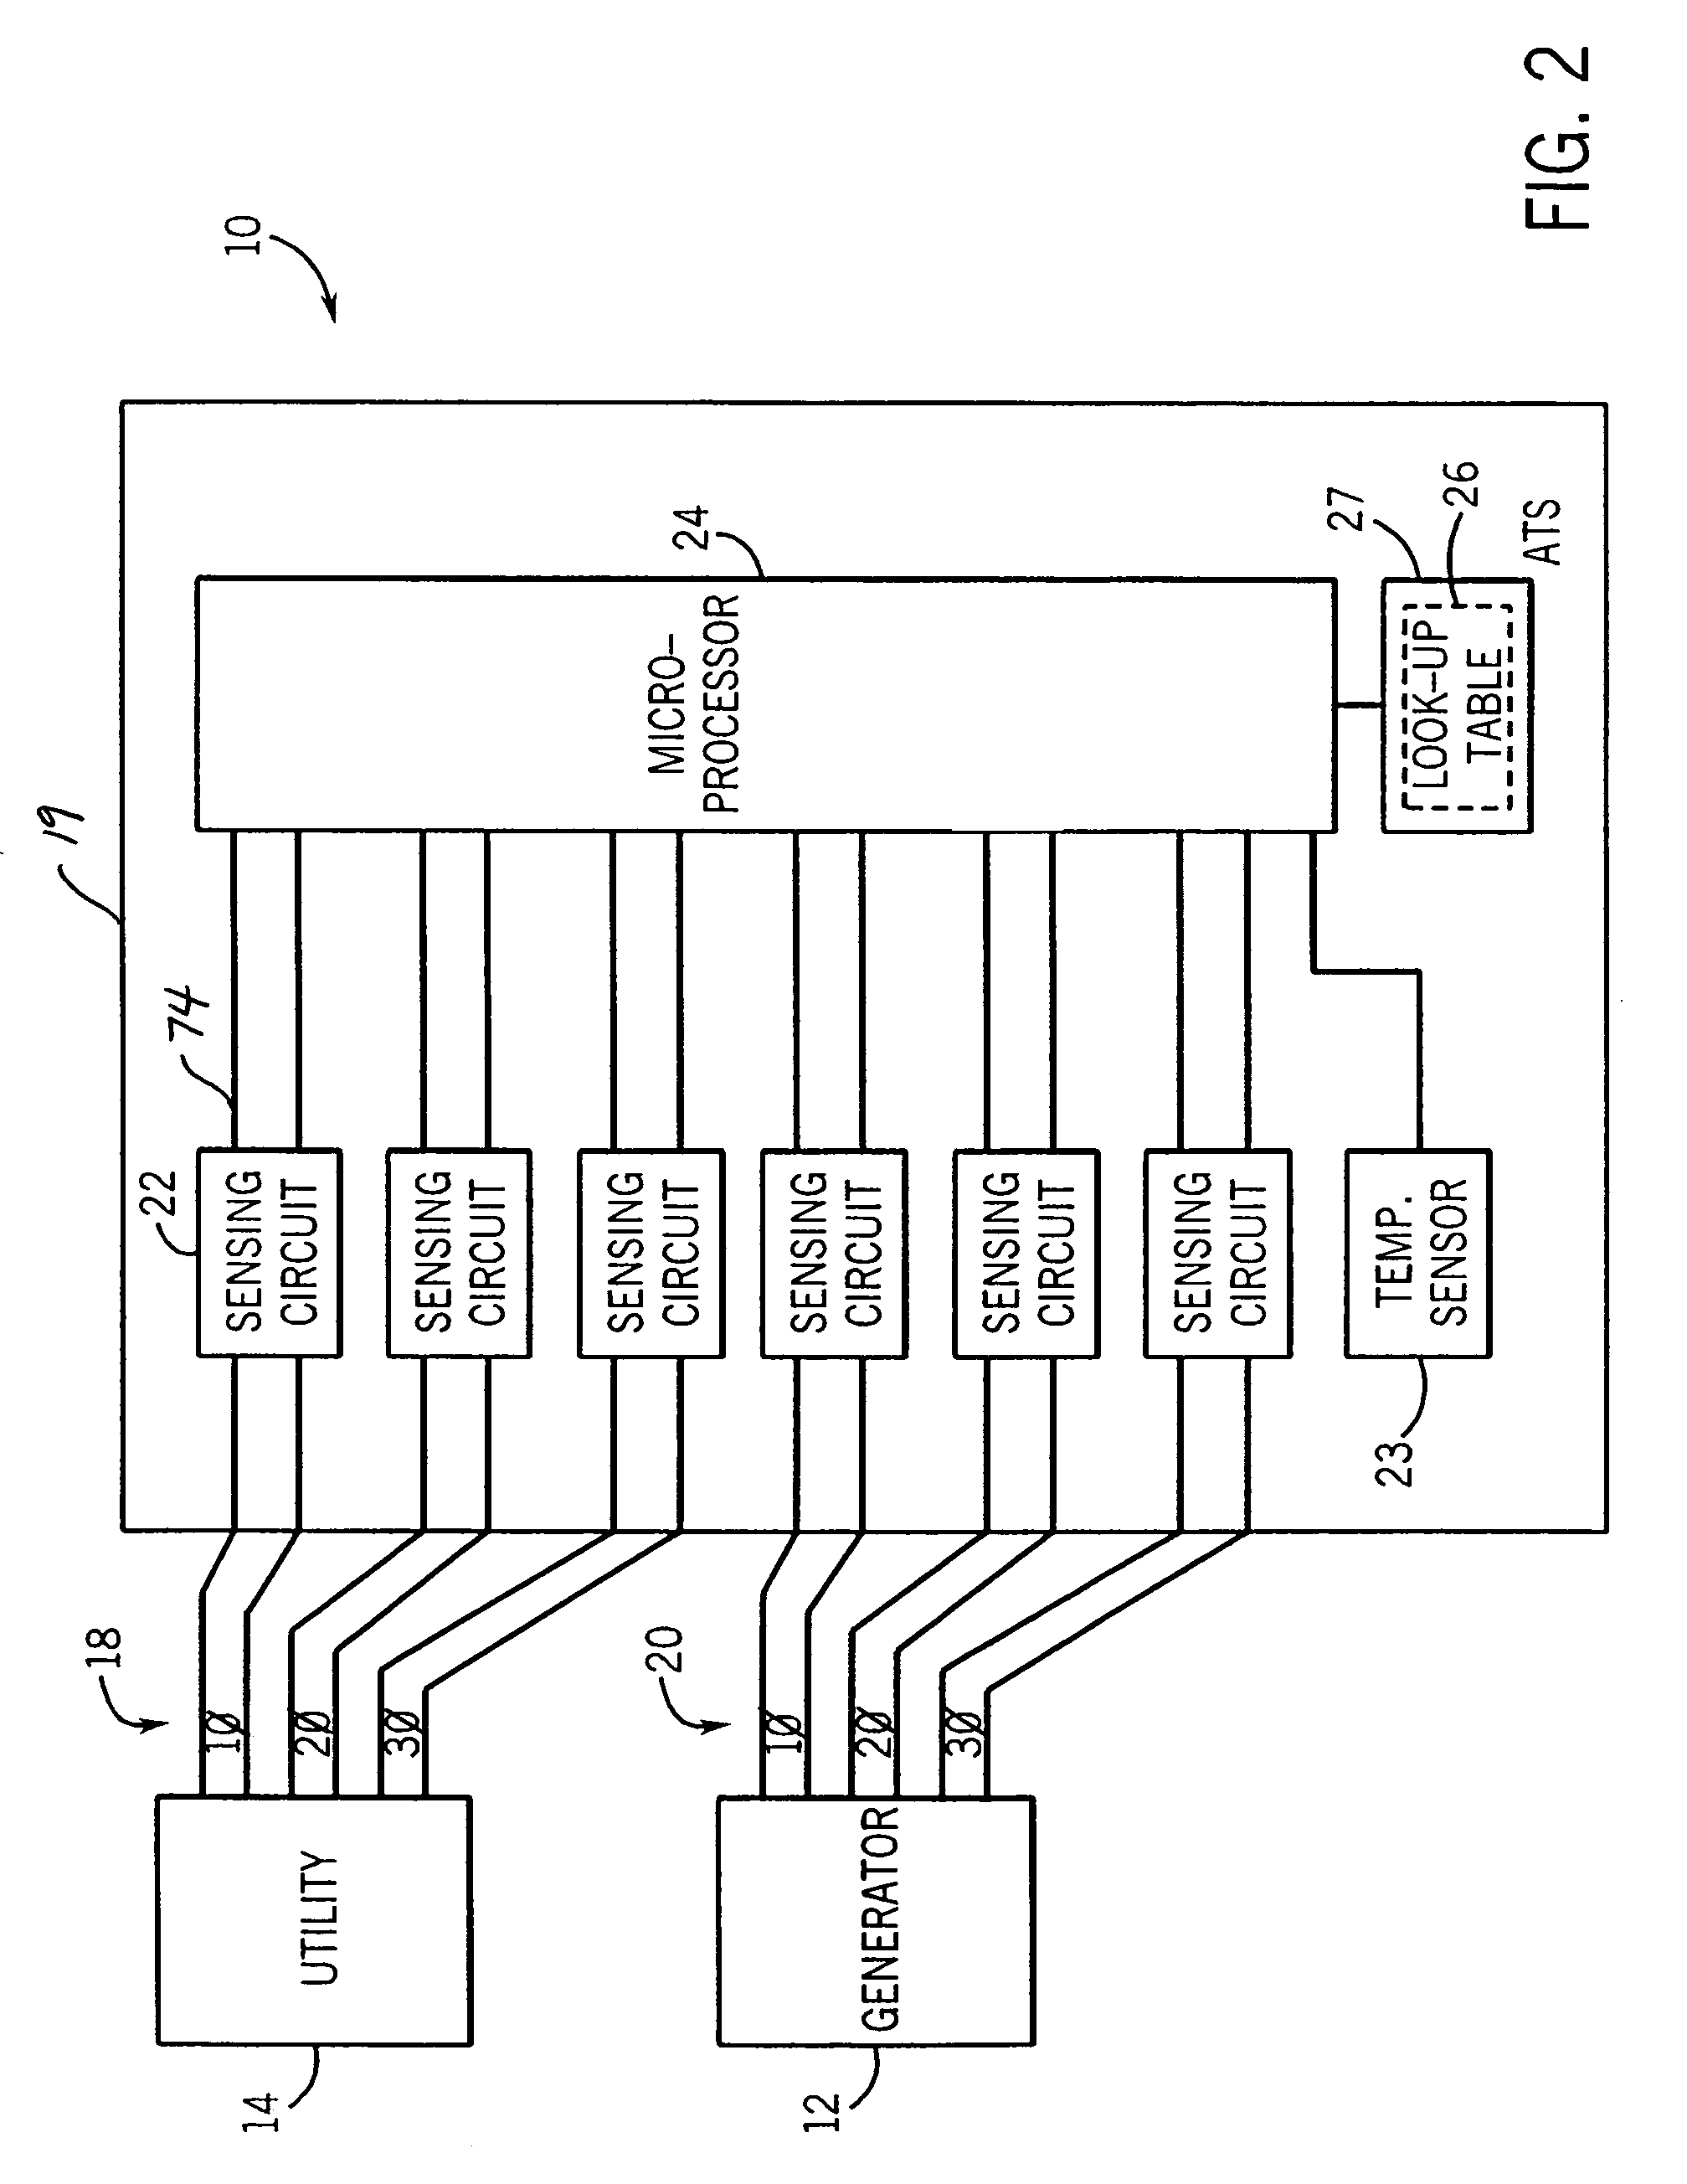 Method and apparatus for sensing voltage in an automatic transfer switch system